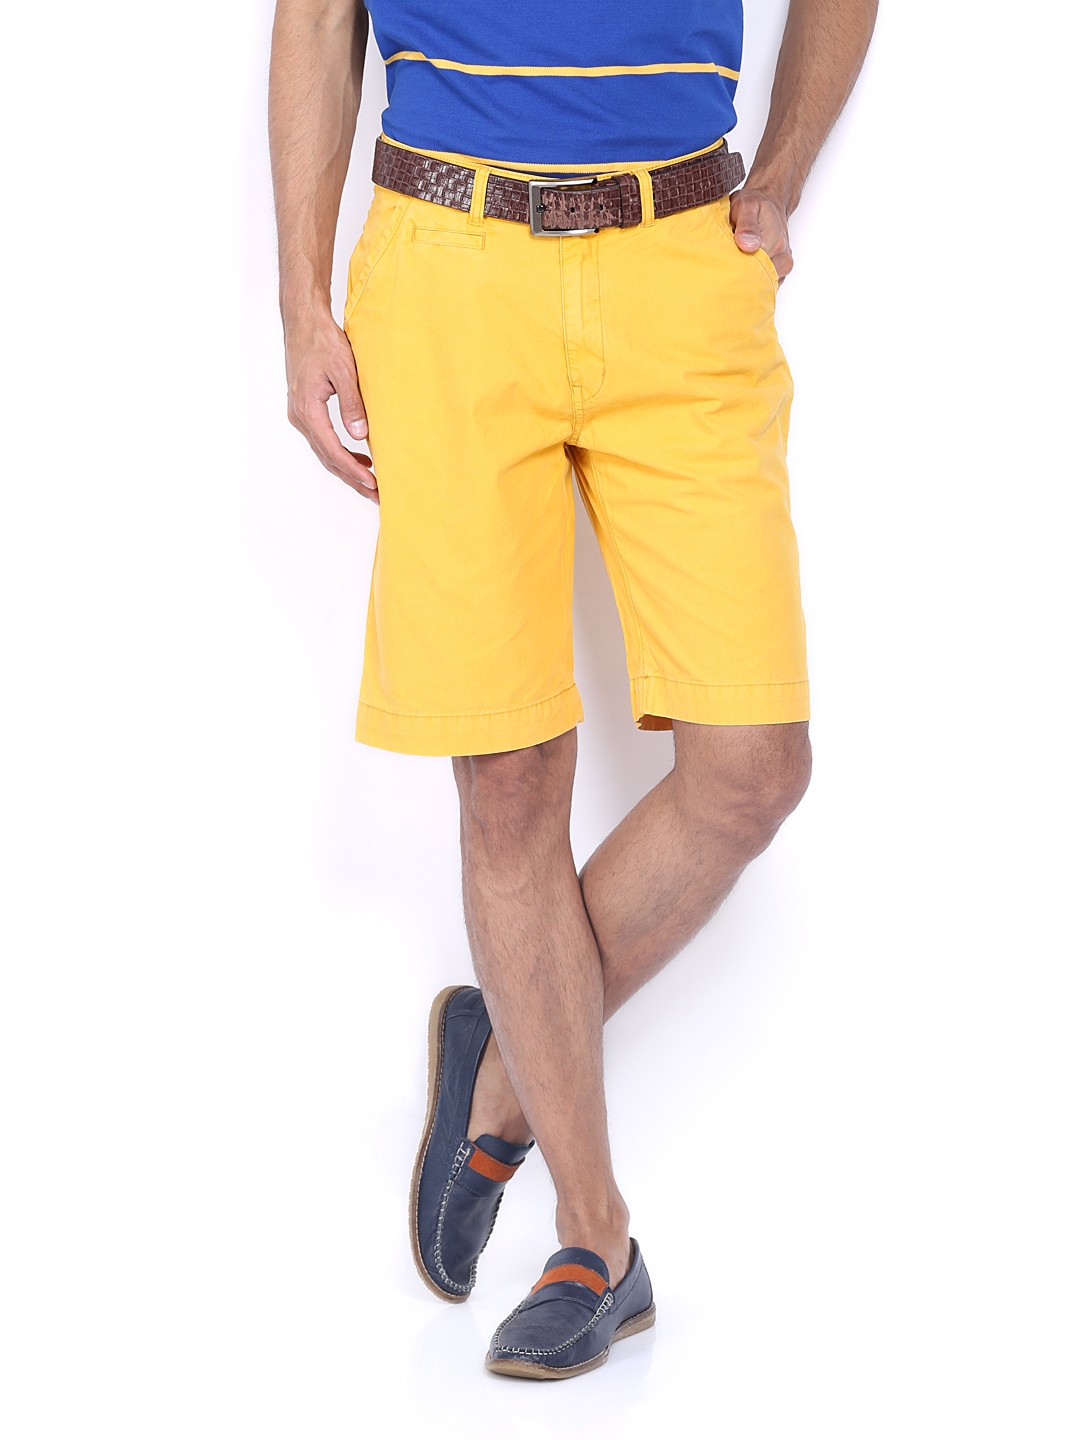 What To Wear With Yellow Shorts